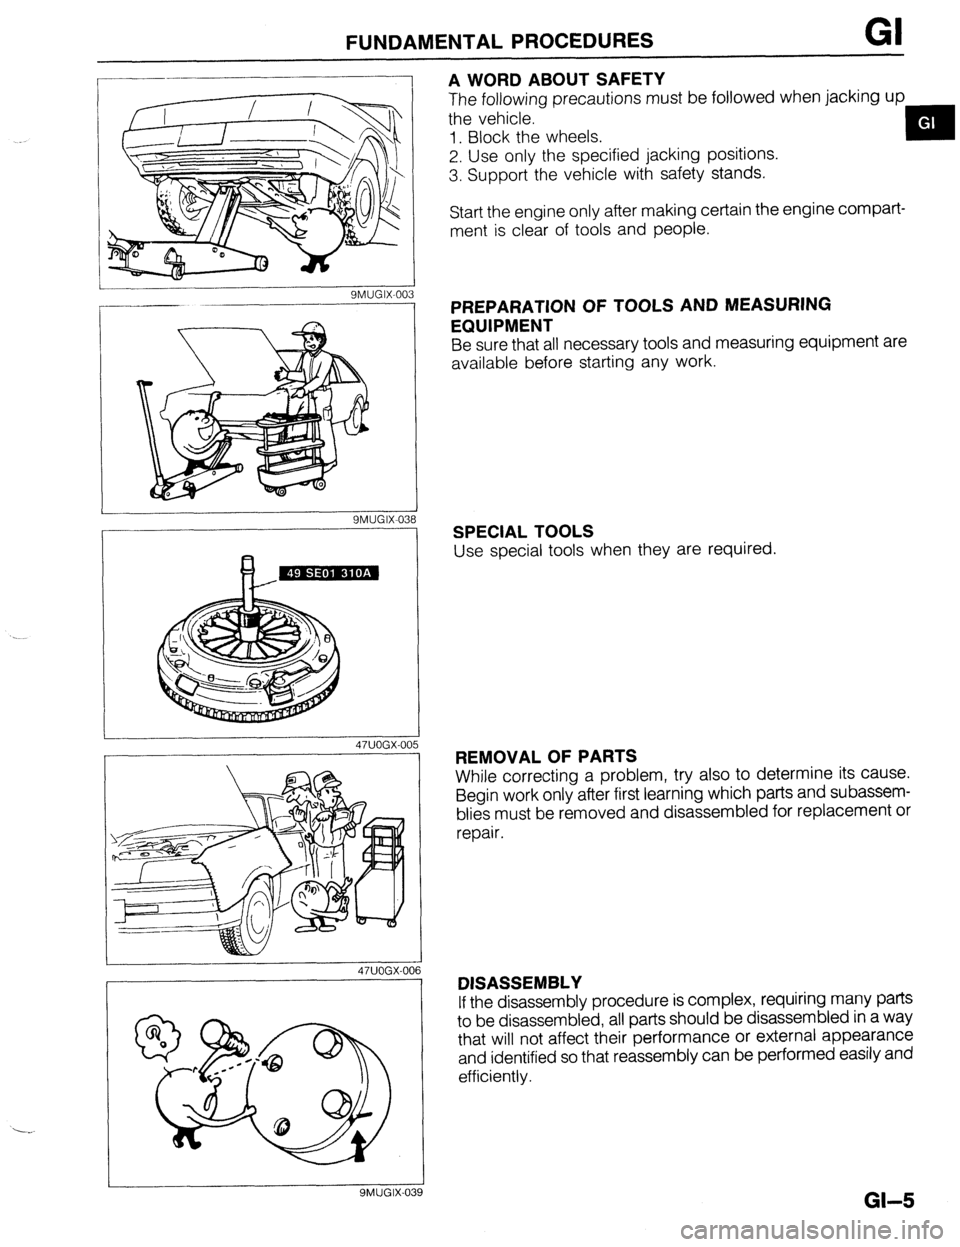 MAZDA 323 1989  Factory Repair Manual FUNDAMENTALPROCEDURES GI 
SMUGIX-0: B 
47UOGX-00 5  ‘3 
16 
A WORD ABOUT SAFETY 
The following precautions must be followed when jacking up 
the vehicle. 
1. Block the wheels. 
2. Use only the speci